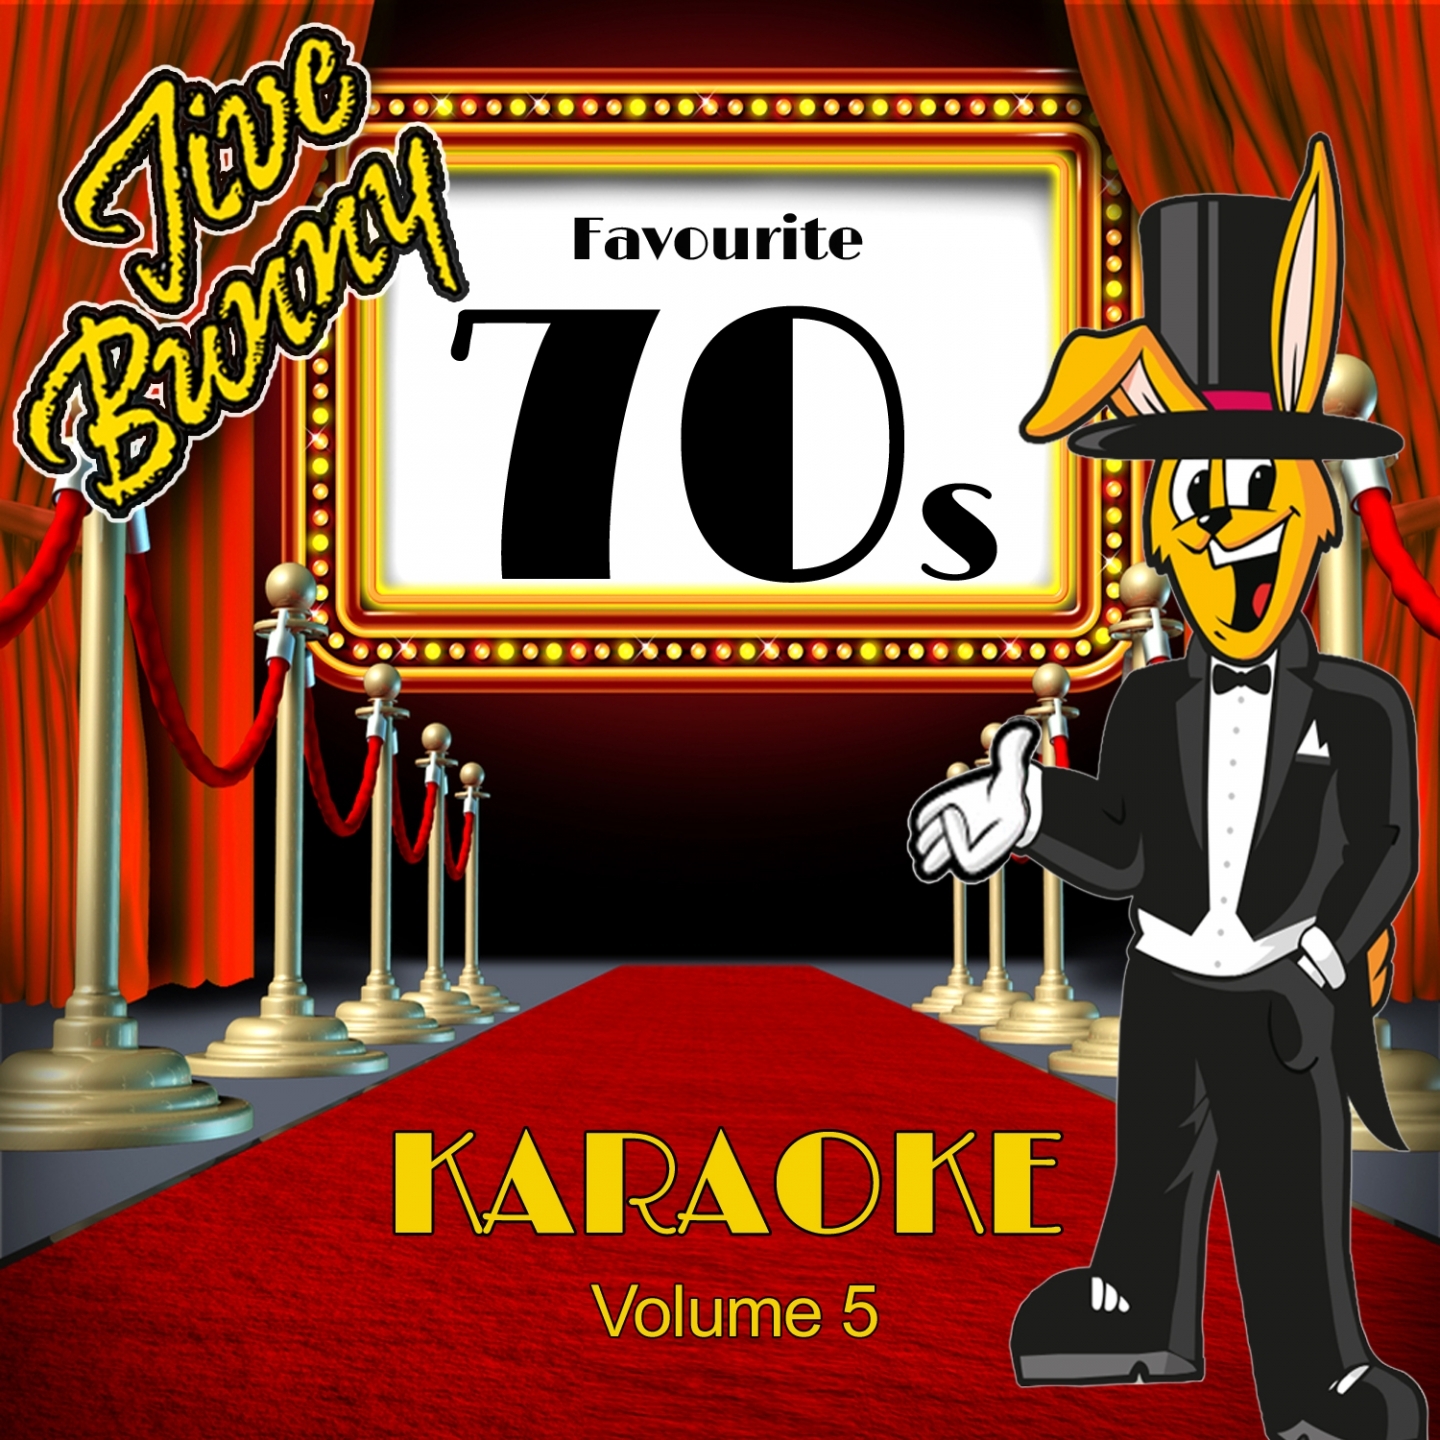 Let's Stick Together (Karaoke Version) (Originally Performed By Bryan Ferry)